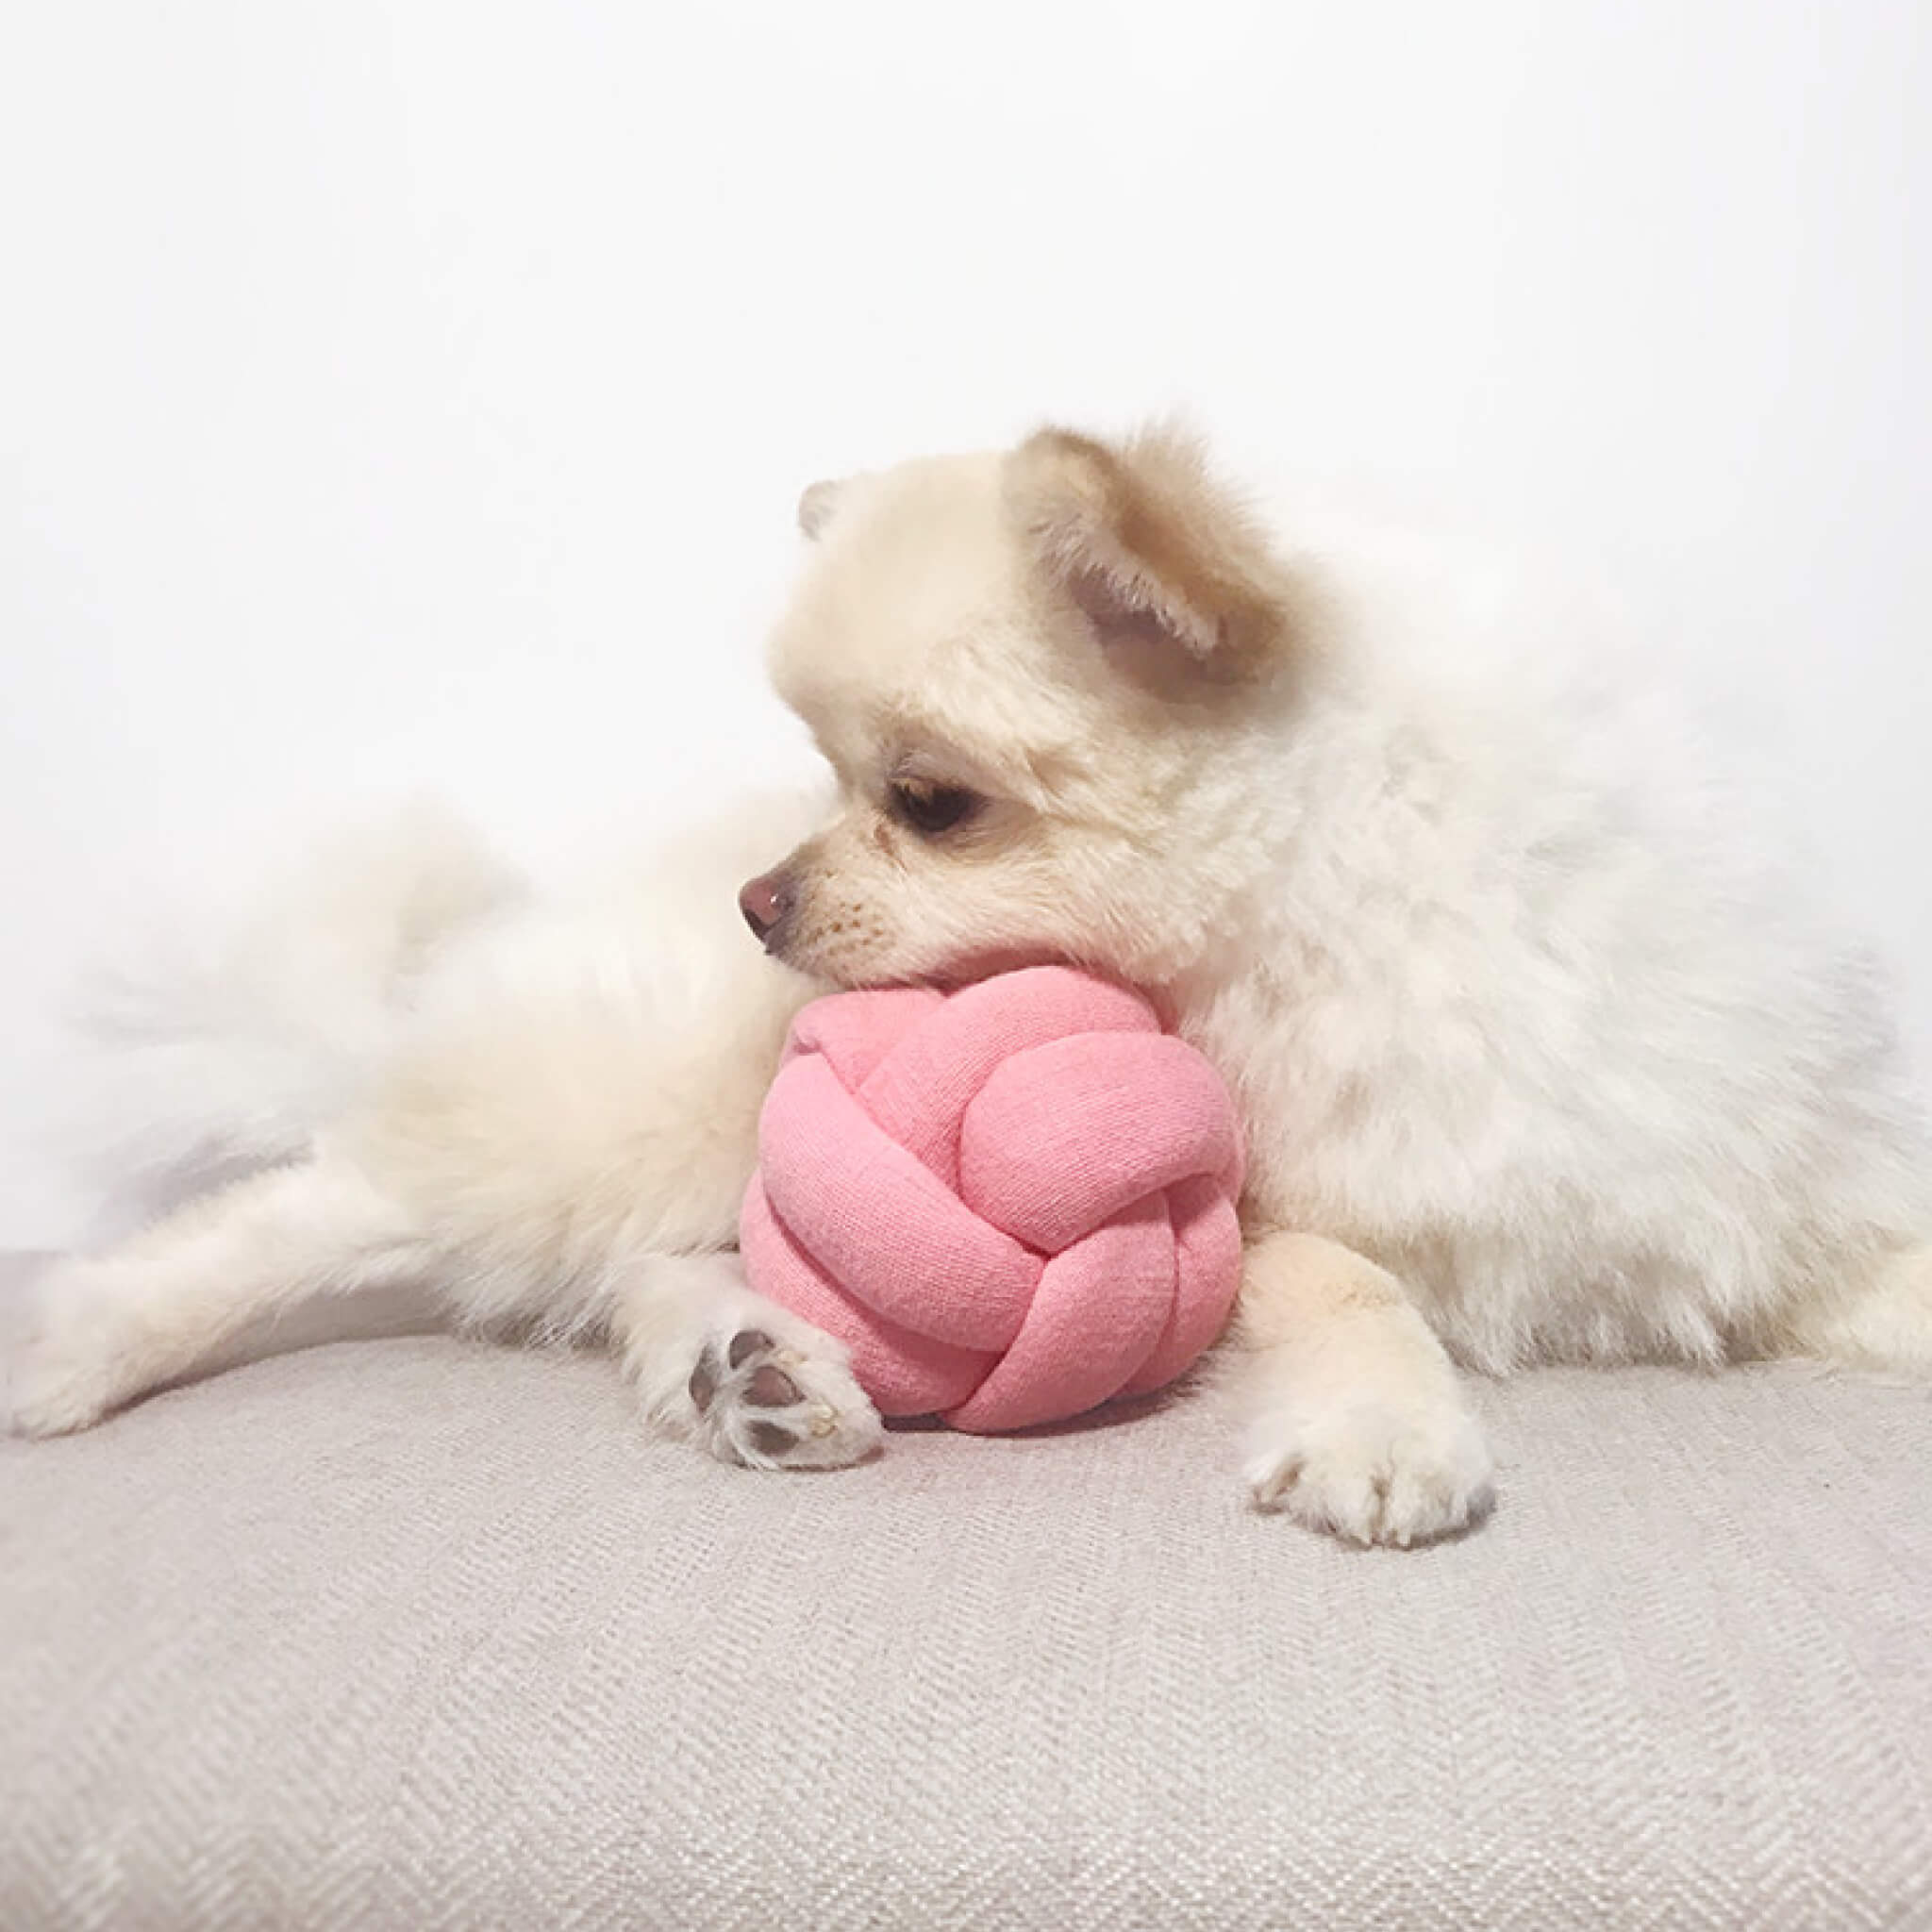 Dog with pink knotted ball toy.